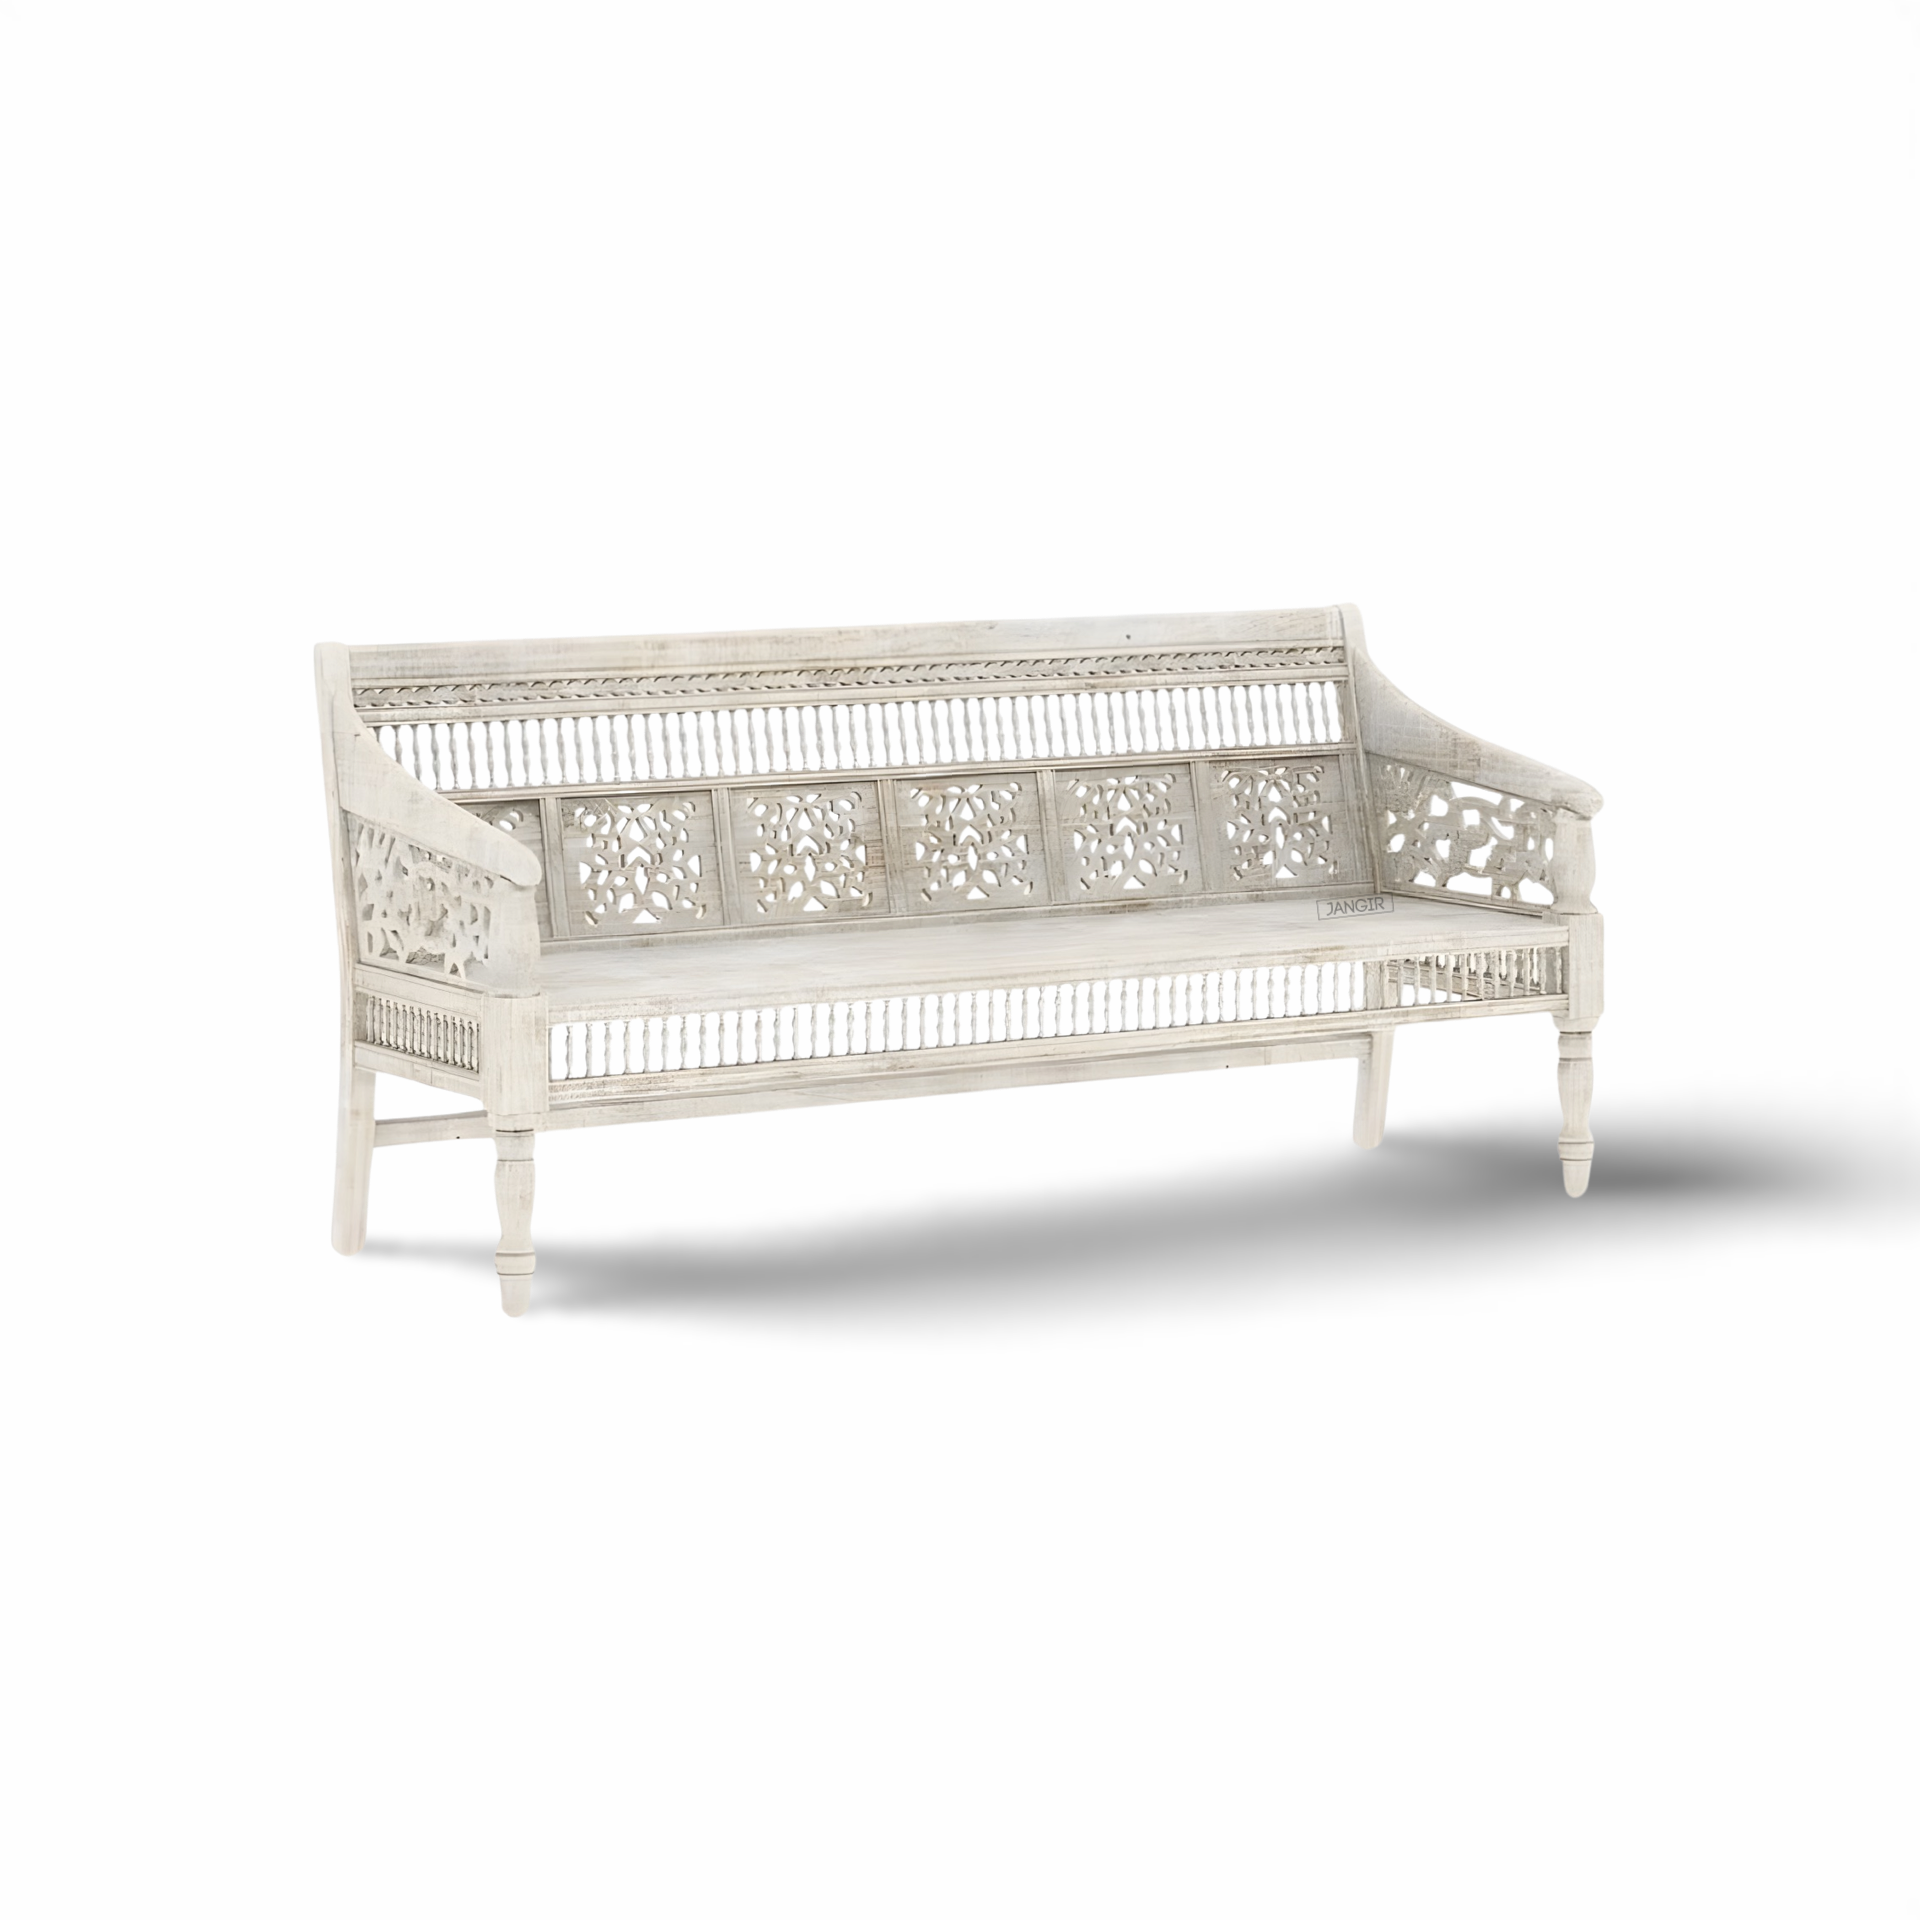 Discover the timeless beauty of our white rustic carved sofa. Handcrafted from premium sheesham wood, this traditional-style piece adds elegance and charm to any living space. Shop now!